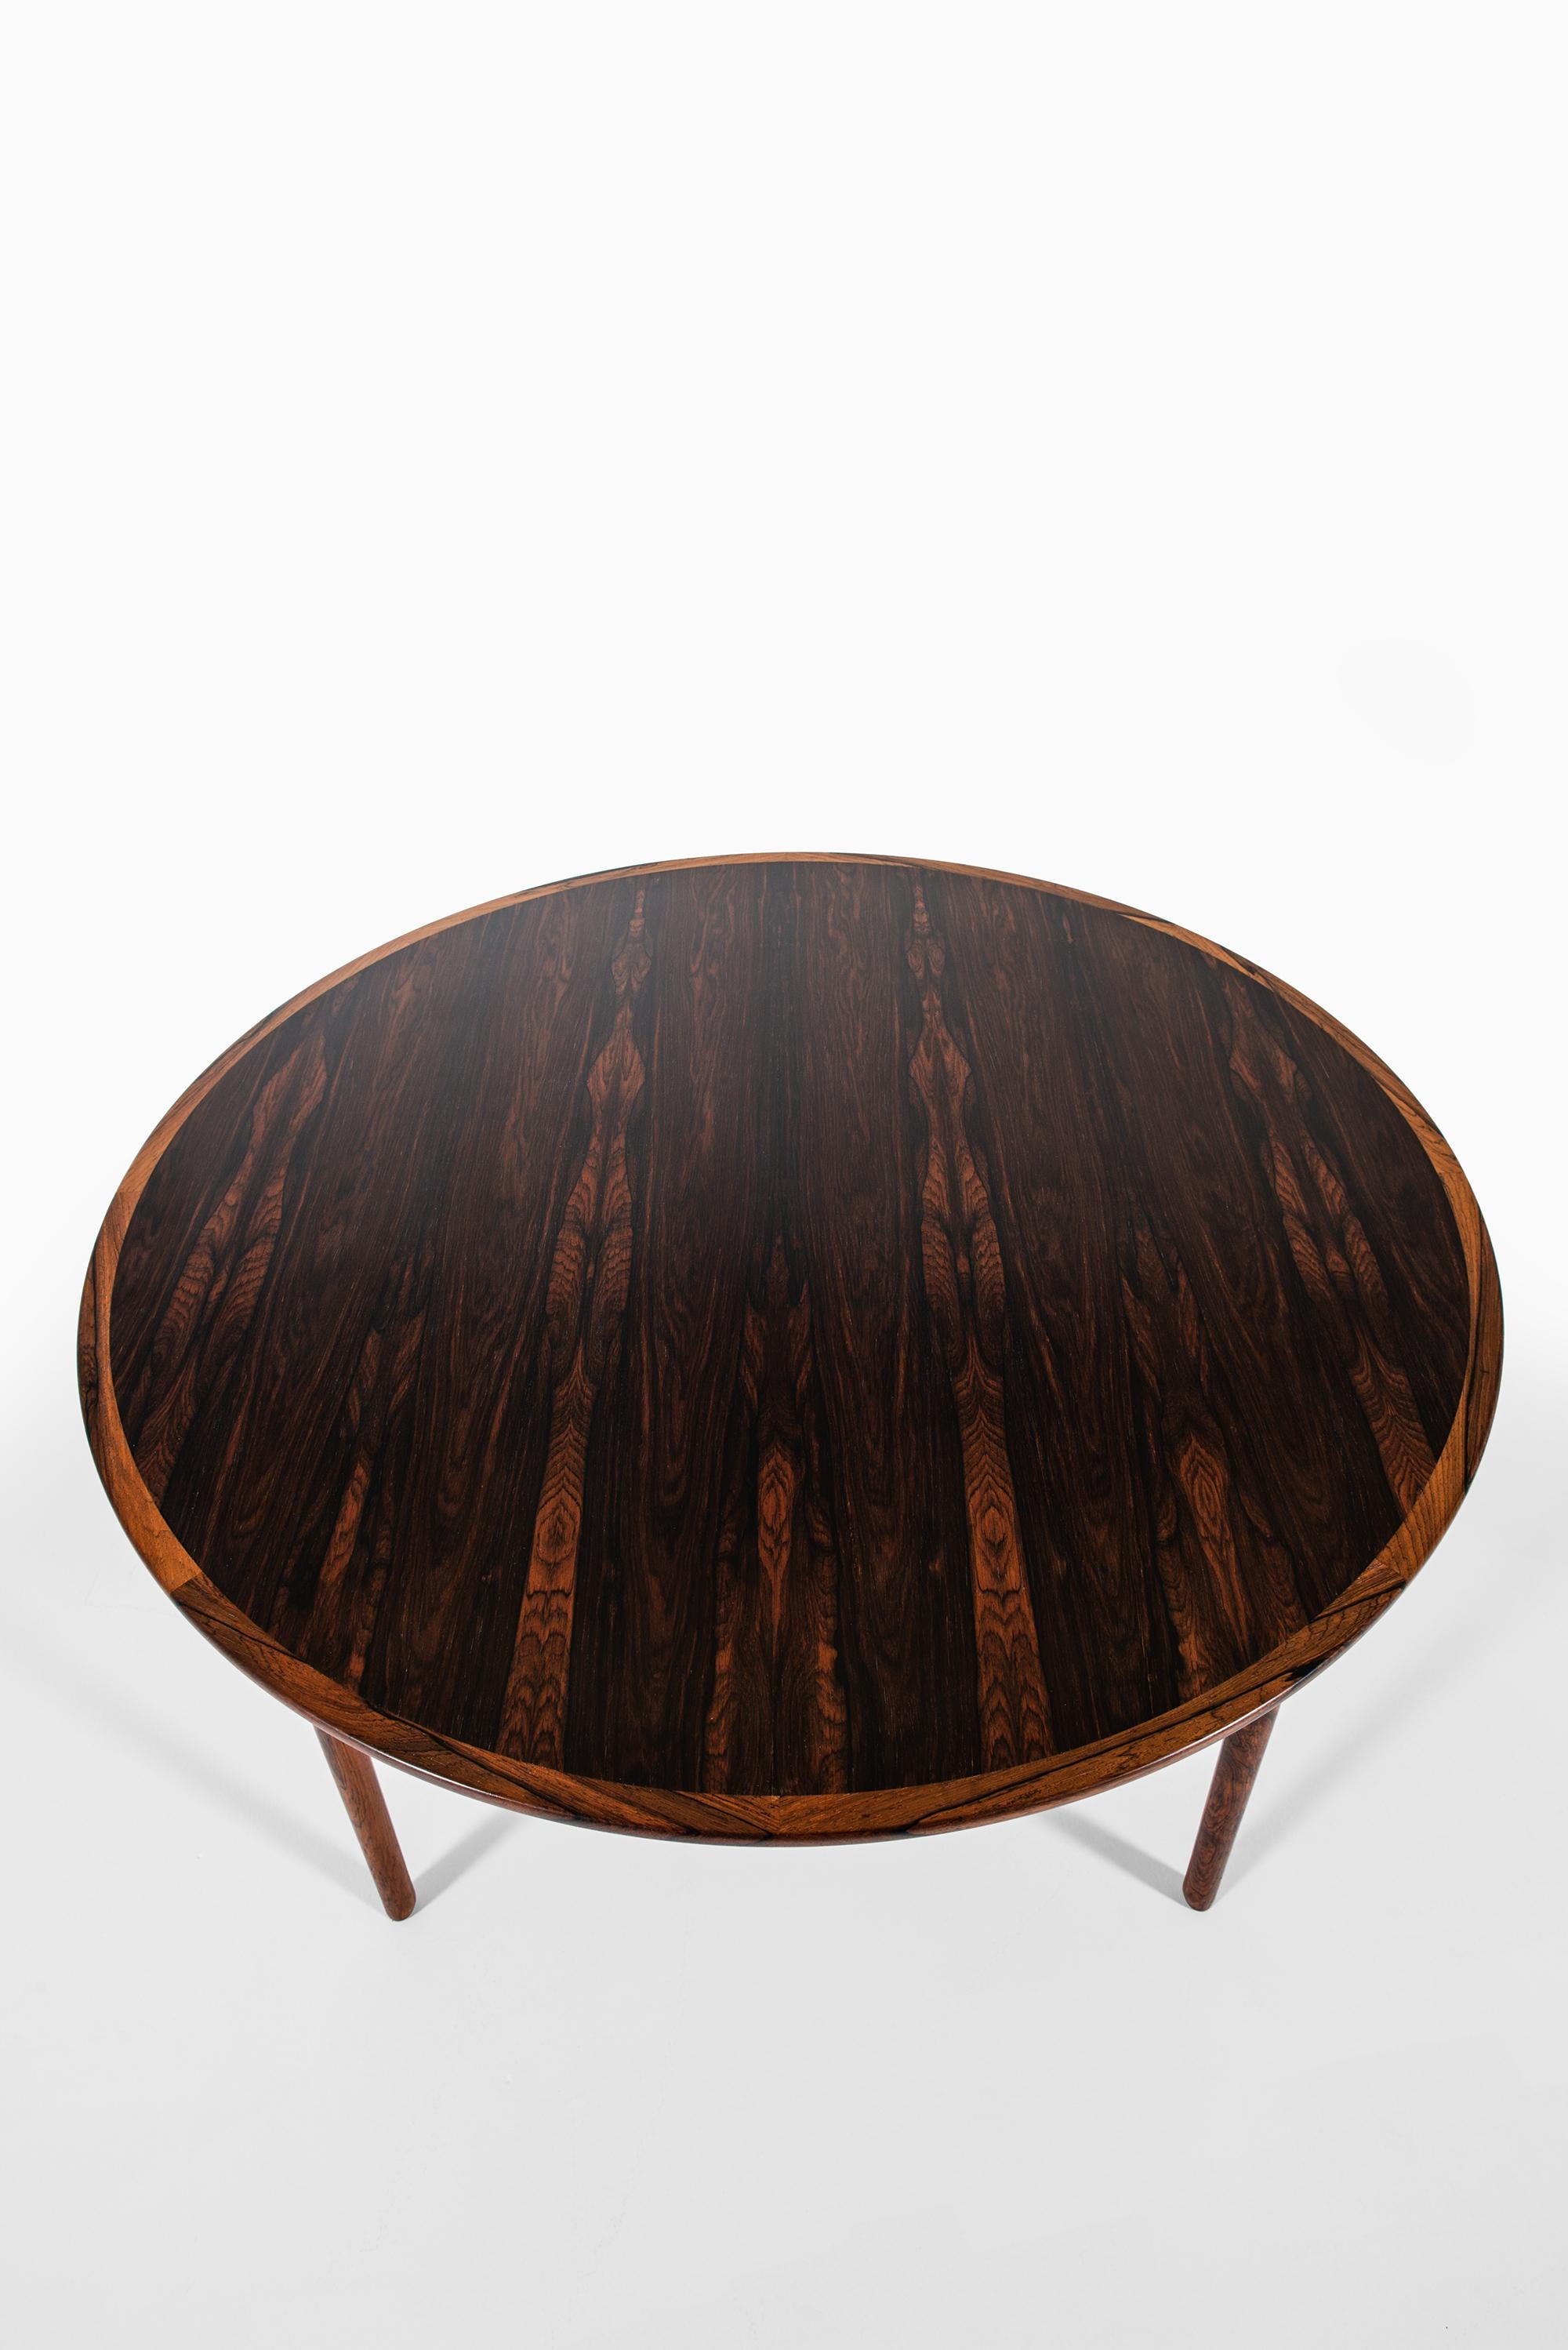 Danish Ole Wanscher Coffee Table Produced by P. Jeppesens Møbelfabrik in Denmark For Sale